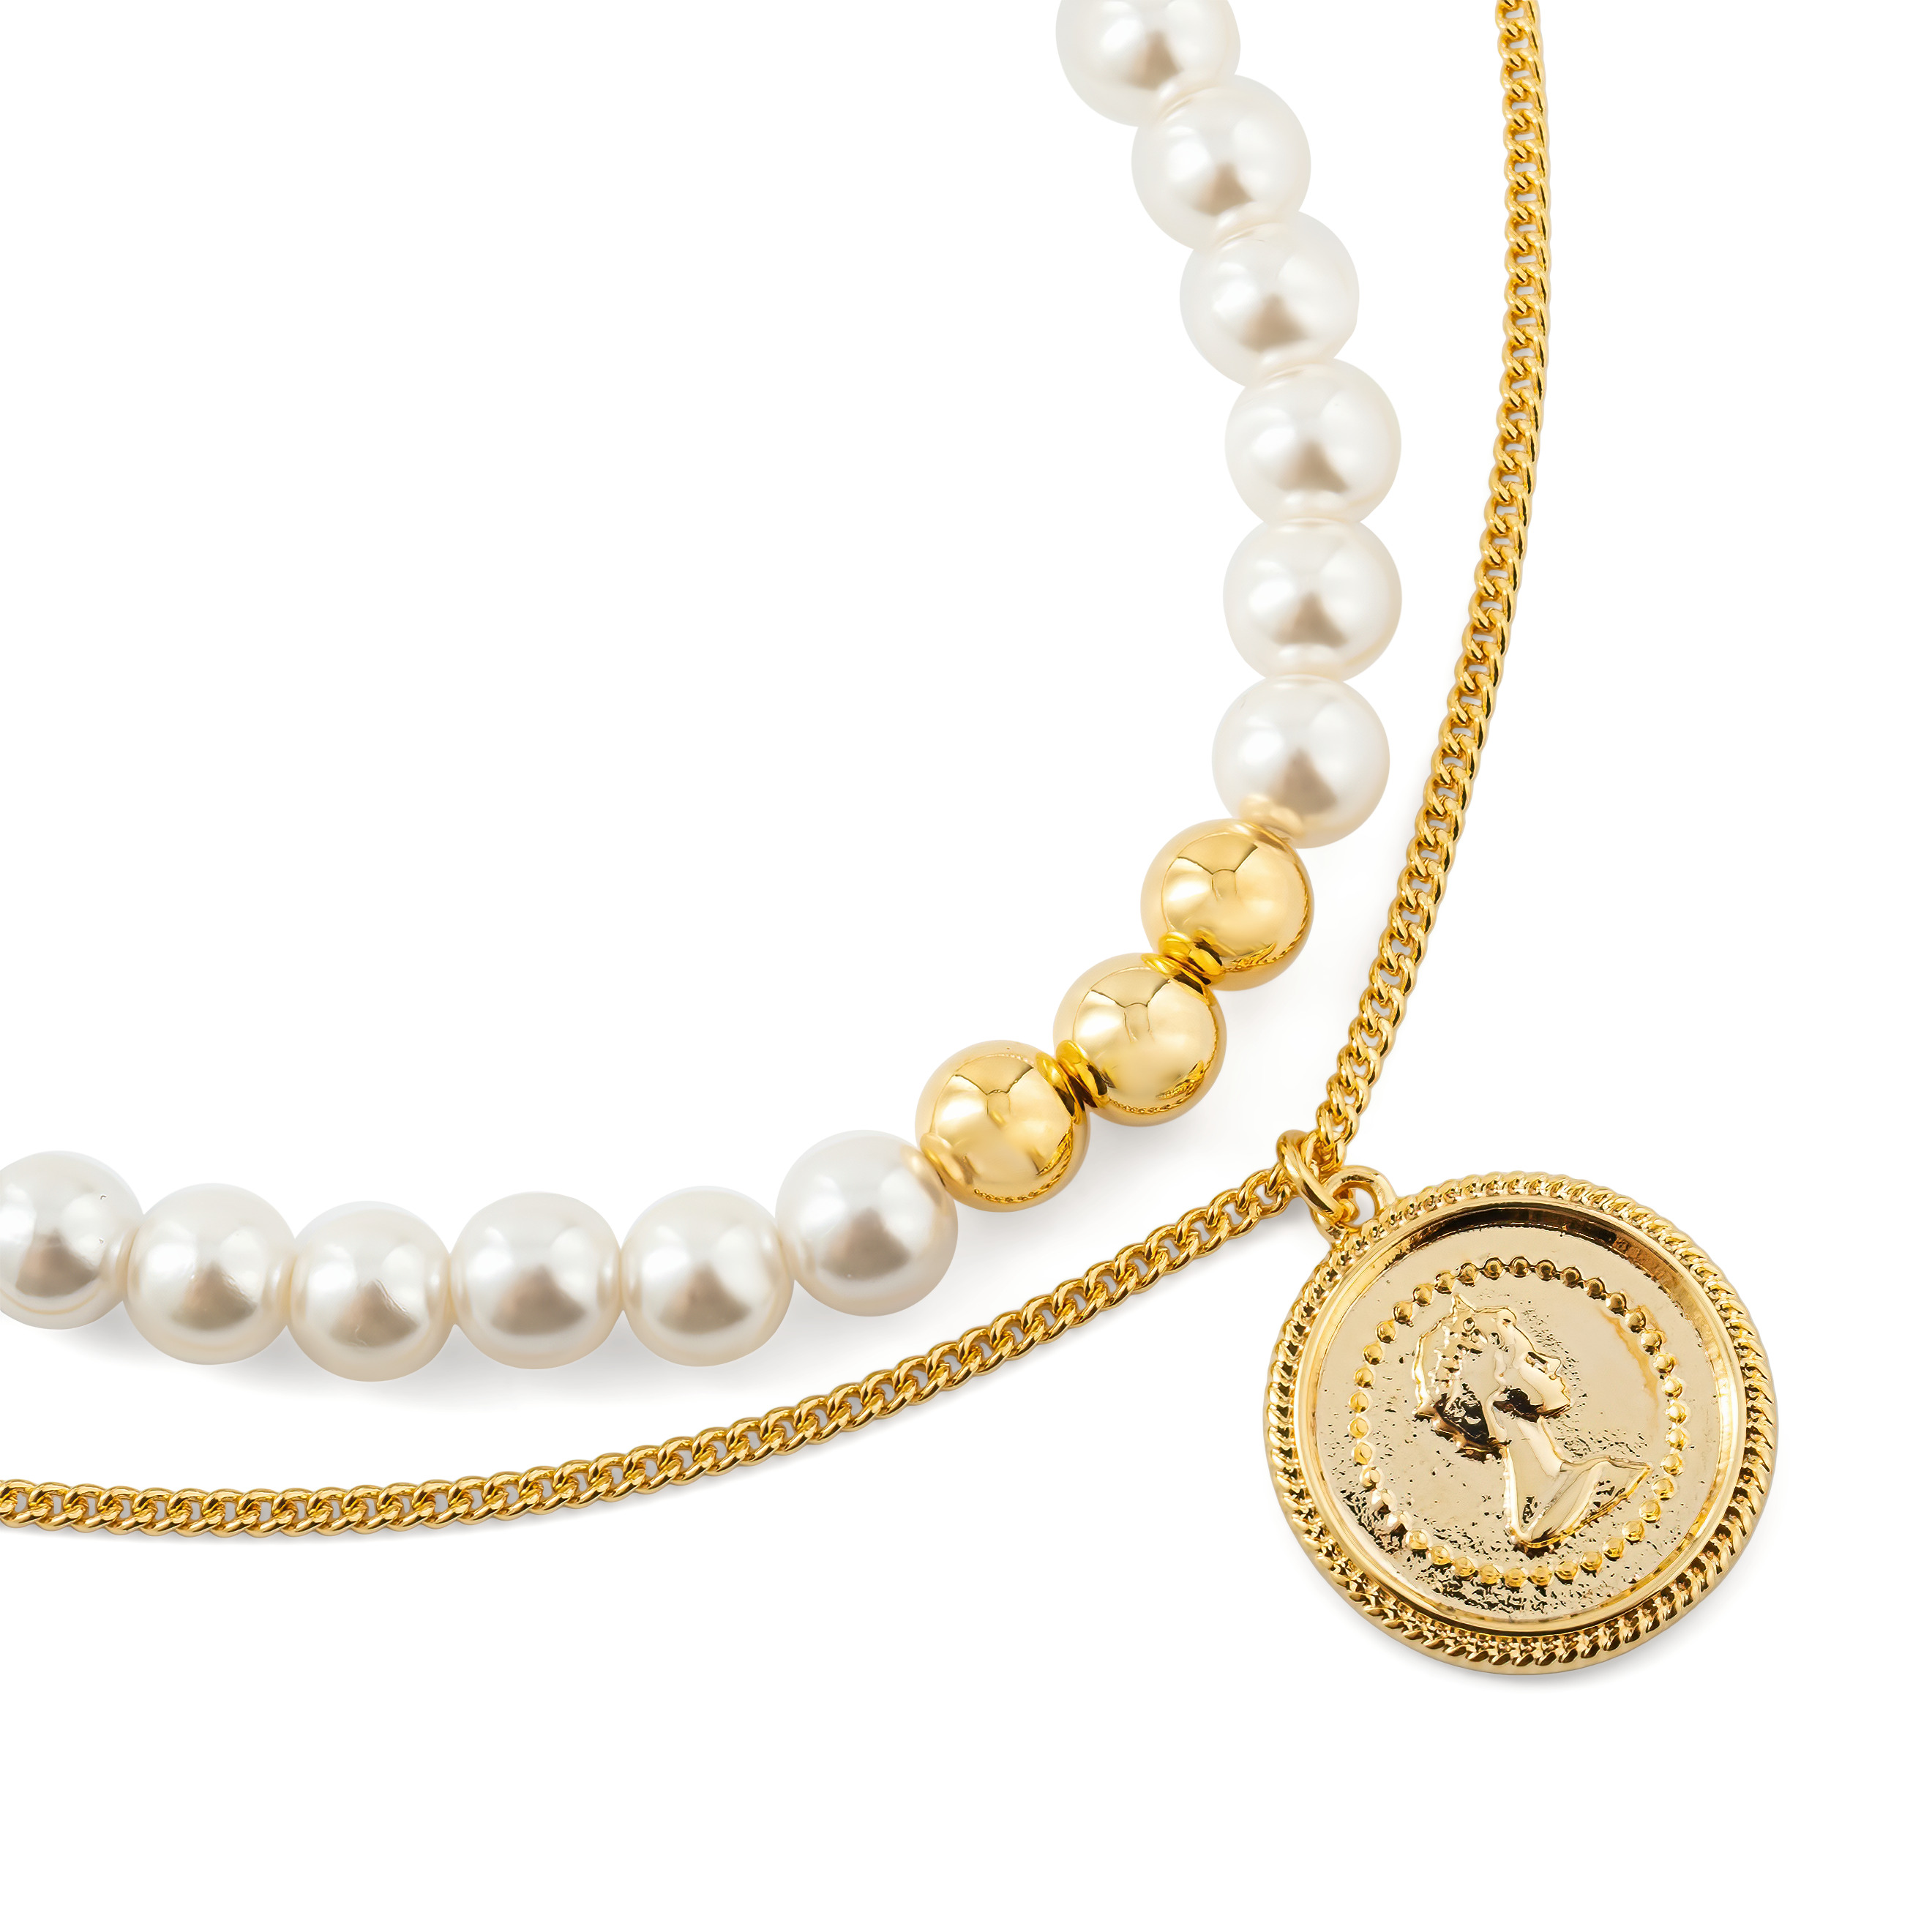 Double pearl necklace with medallion – buy at Poison Drop online store, SKU  44771.